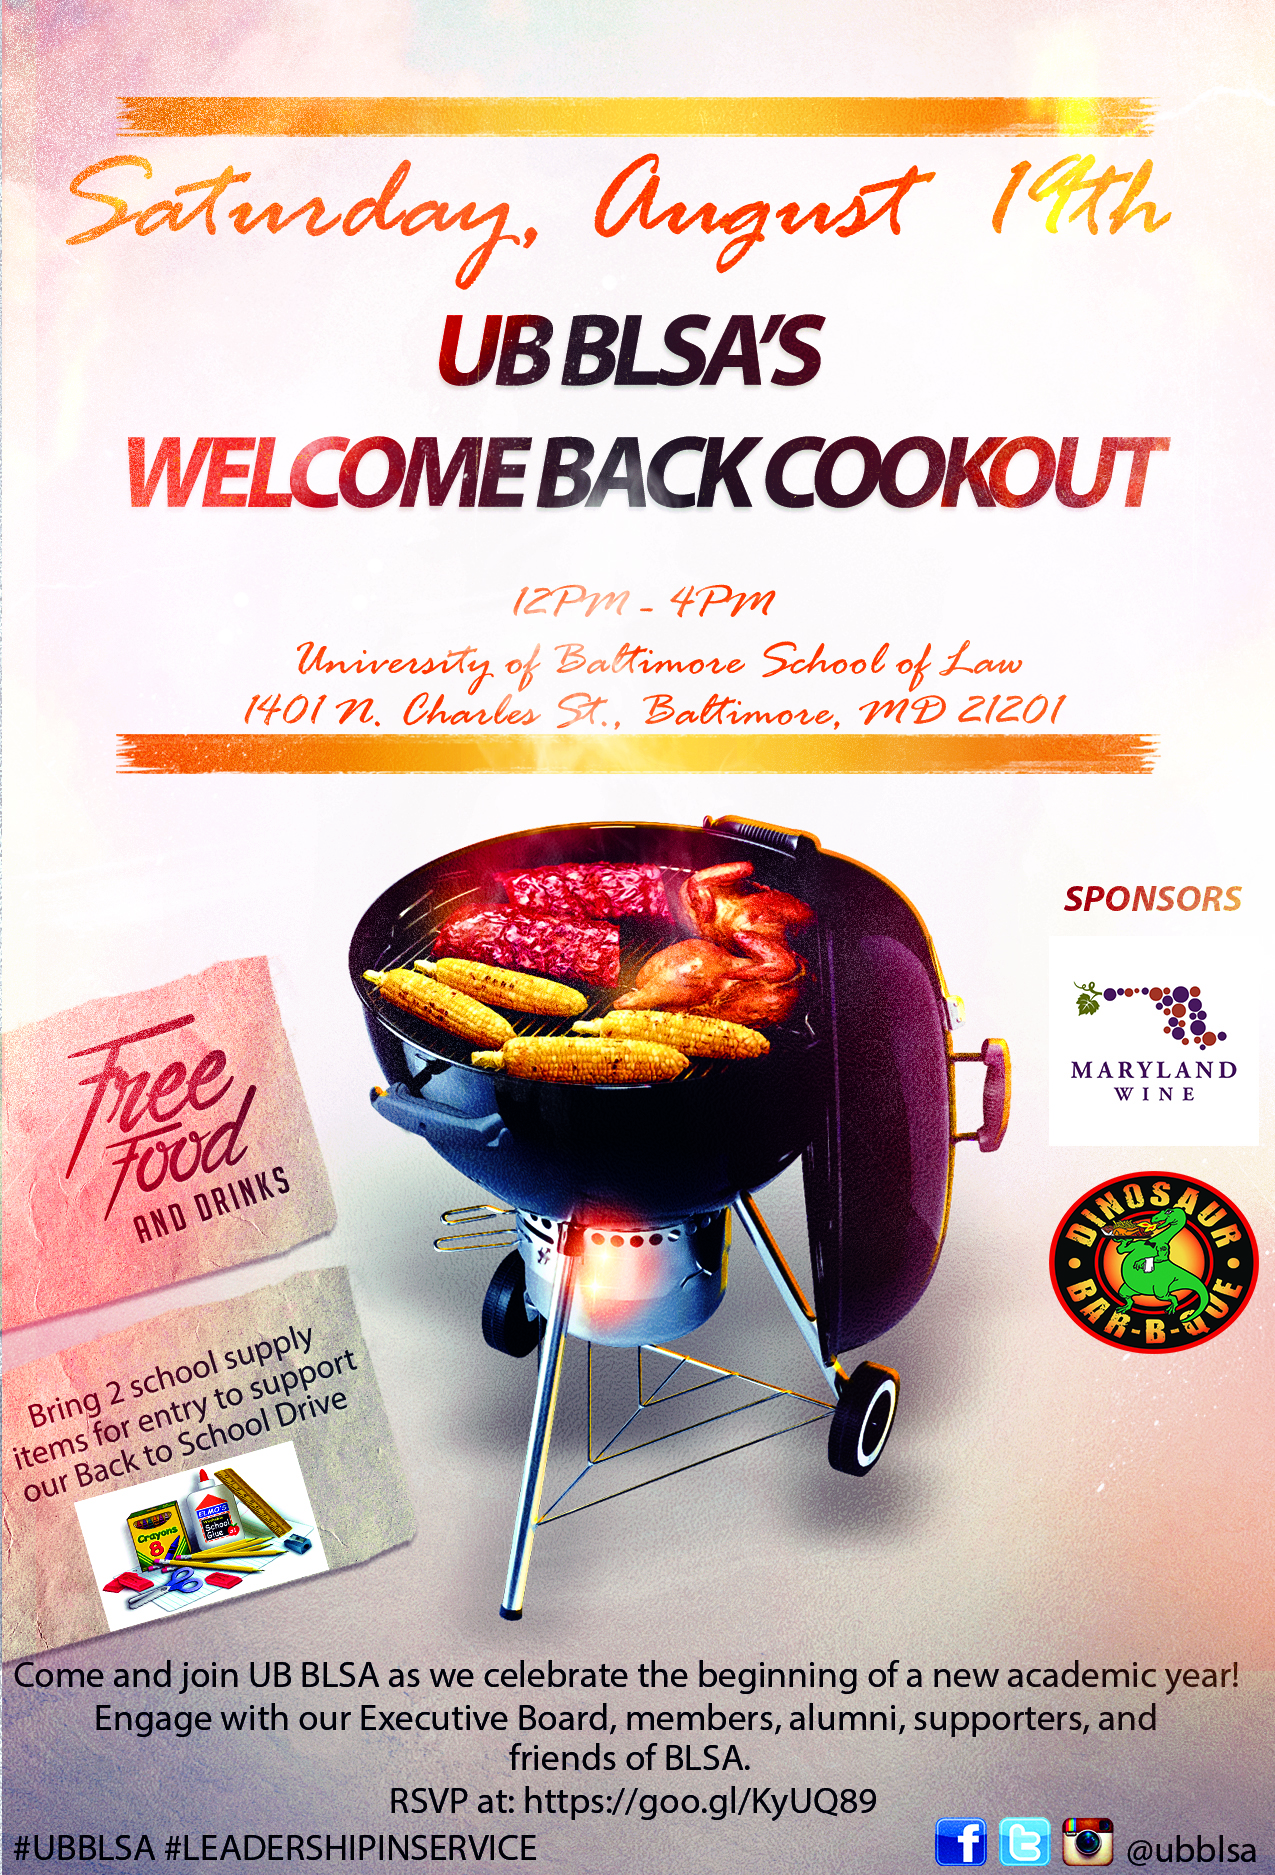 UB BLSA's Welcome Back Cookout